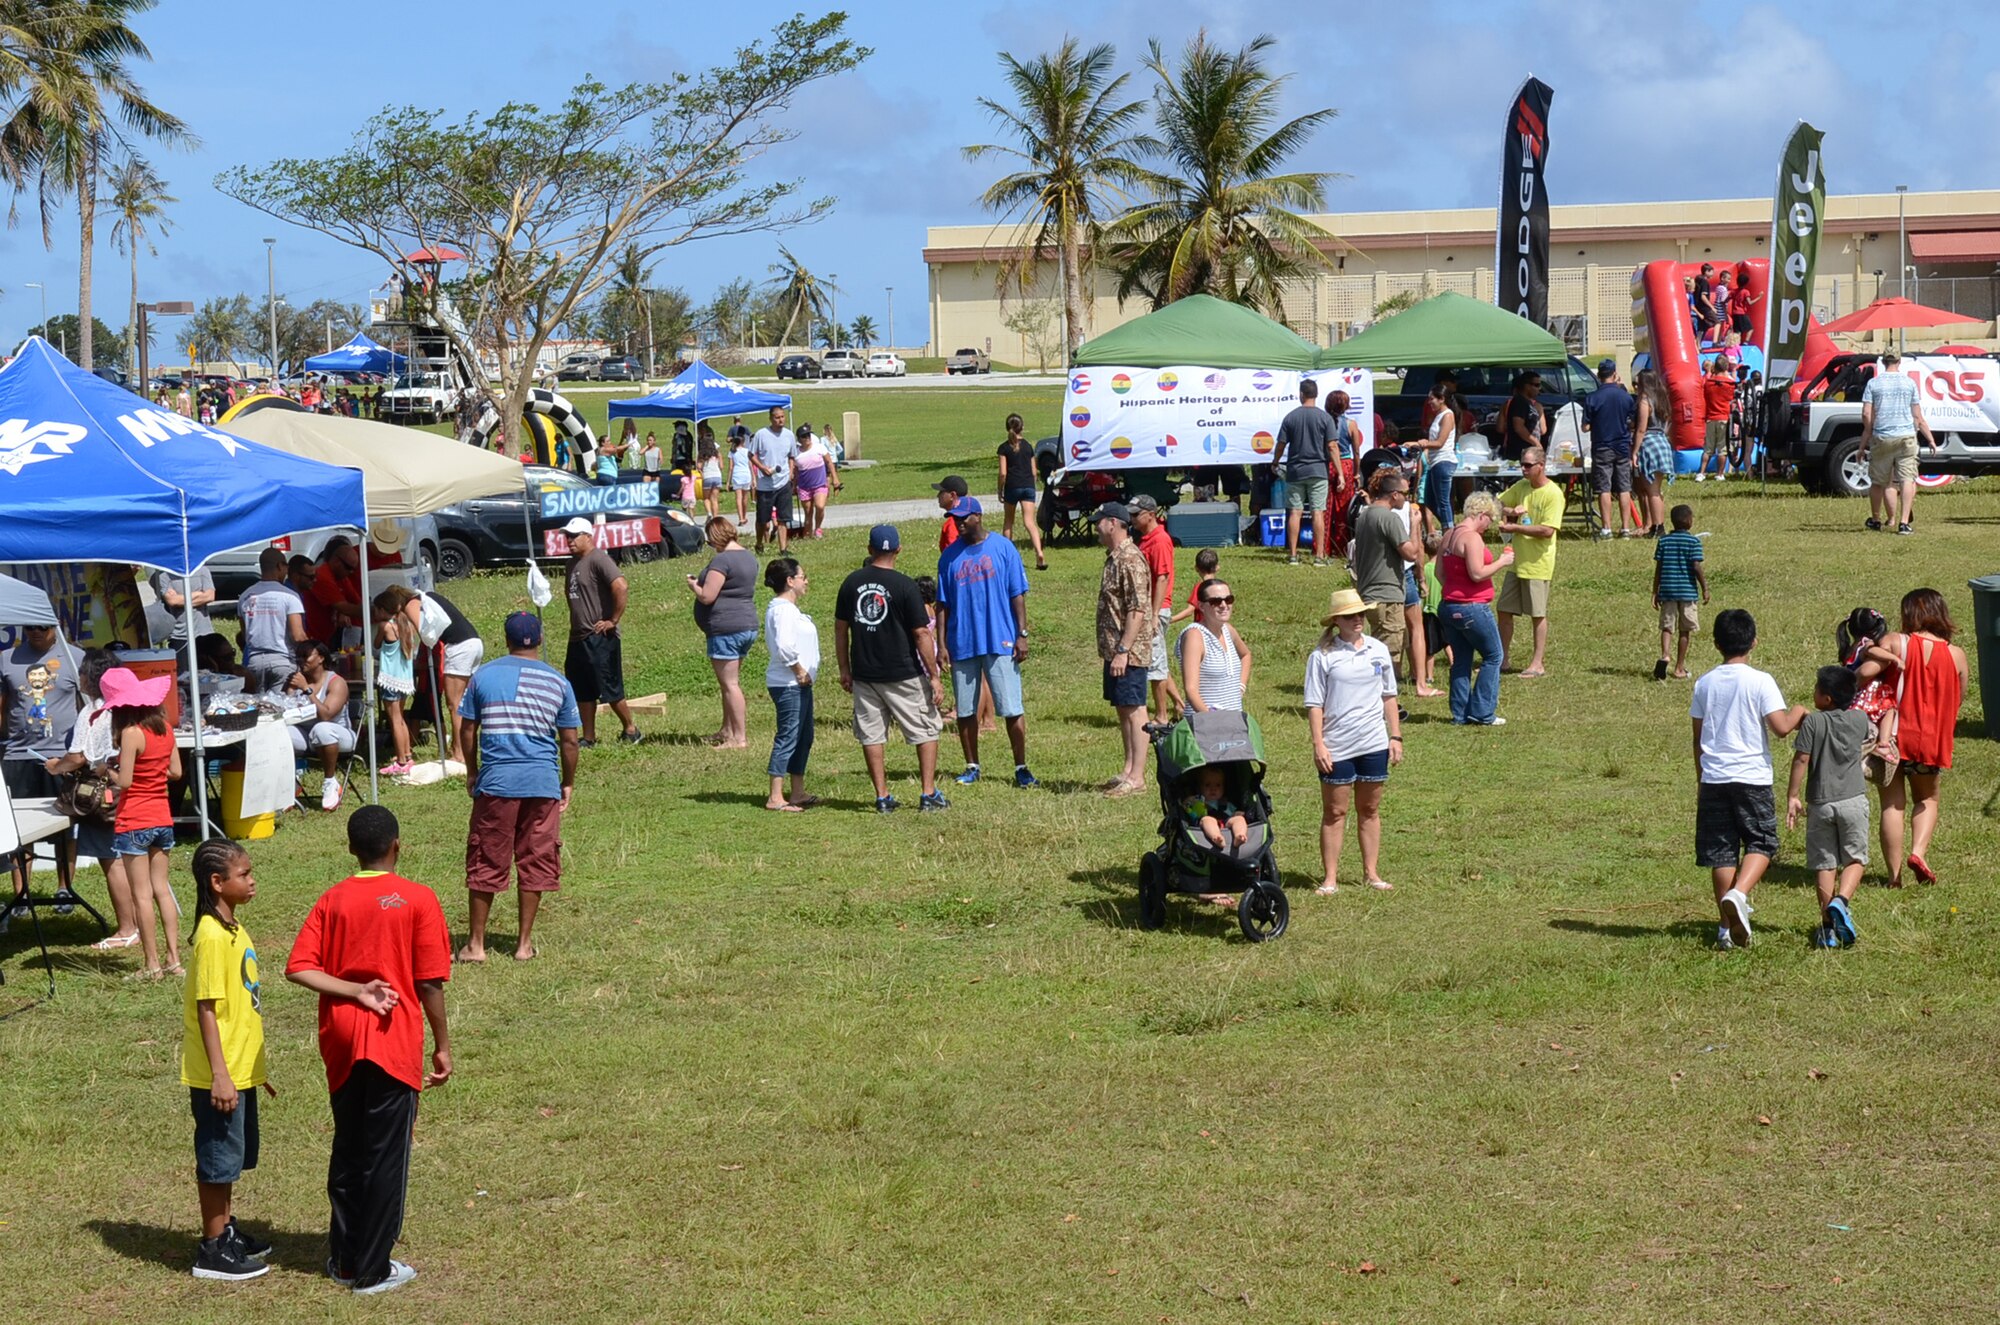 The 36th Force Support Squadron Airmen held a Memorial Day Bash May 25, 2015, at Andersen Air Force Base, Guam. The event included family friendly activities, such as zip lining, multiple bounce houses, food, a barbecue cook-off and a kids’ race track to entertain Team Andersen during the holiday commemoration. (U.S. Air Force photo by Airman 1st Class Alexa Ann Henderson/Released)